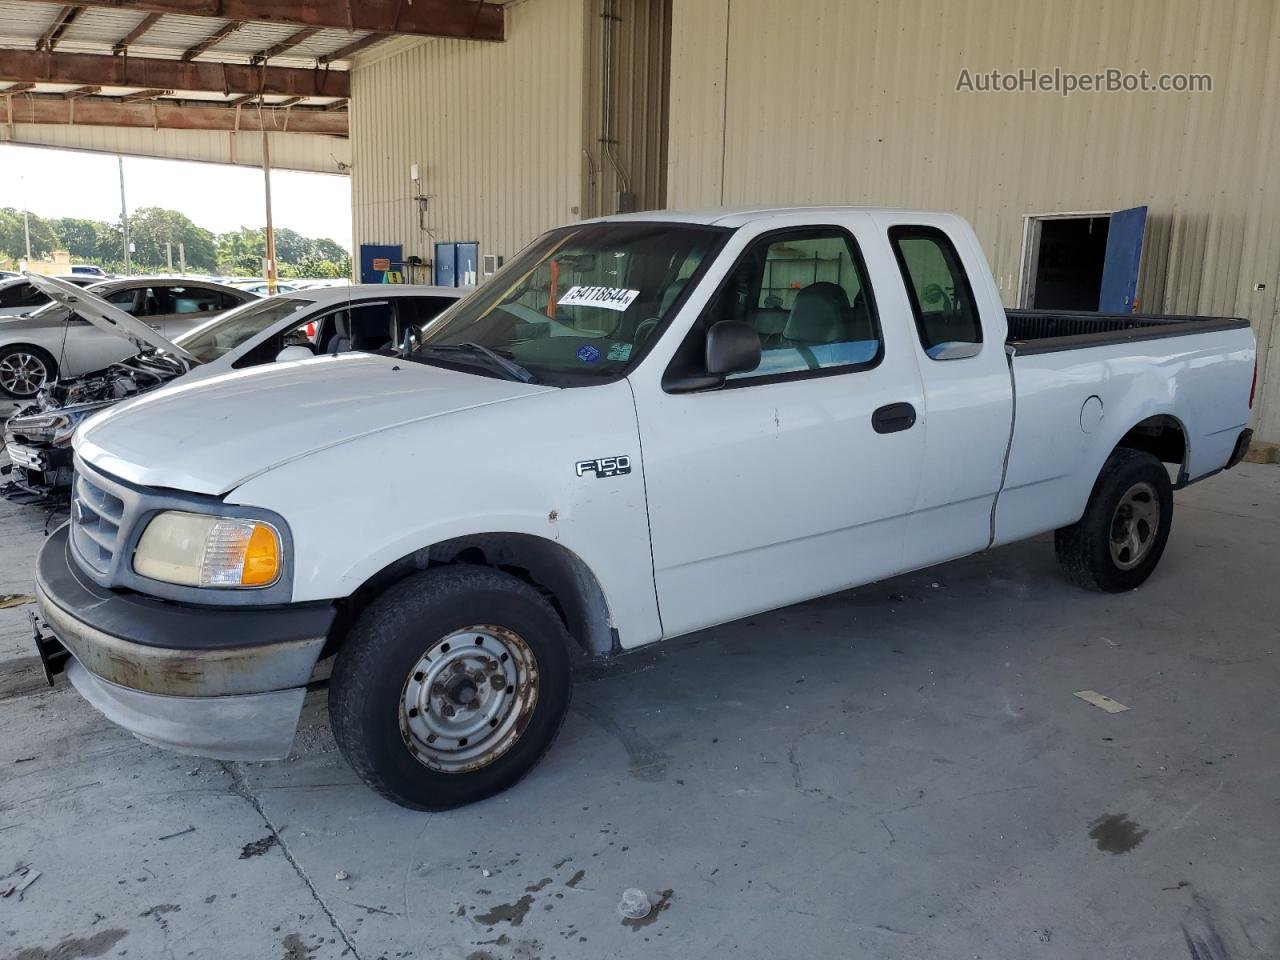 2001 Ford F150  Белый vin: 1FTZX17281NA41139